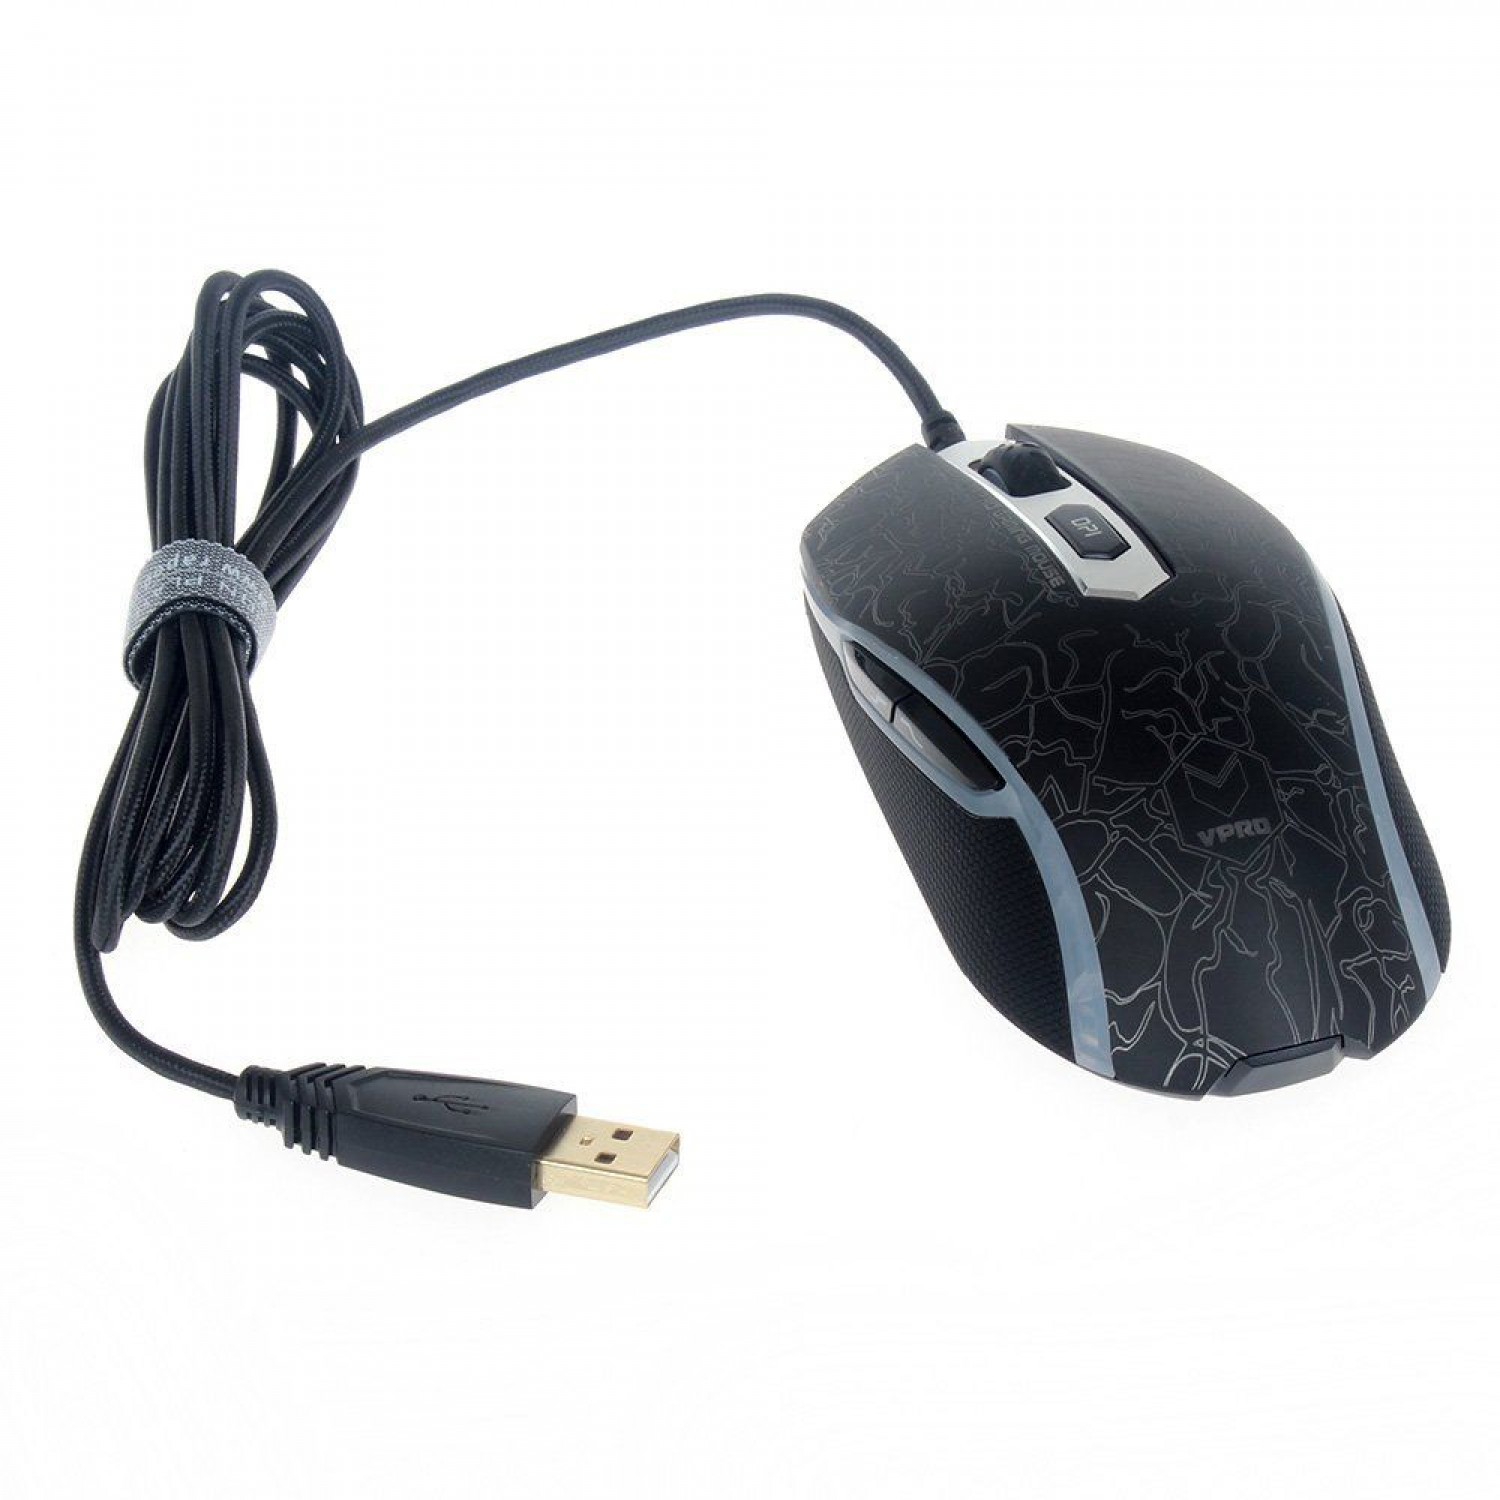 Rapoo V210 Gaming Mouse